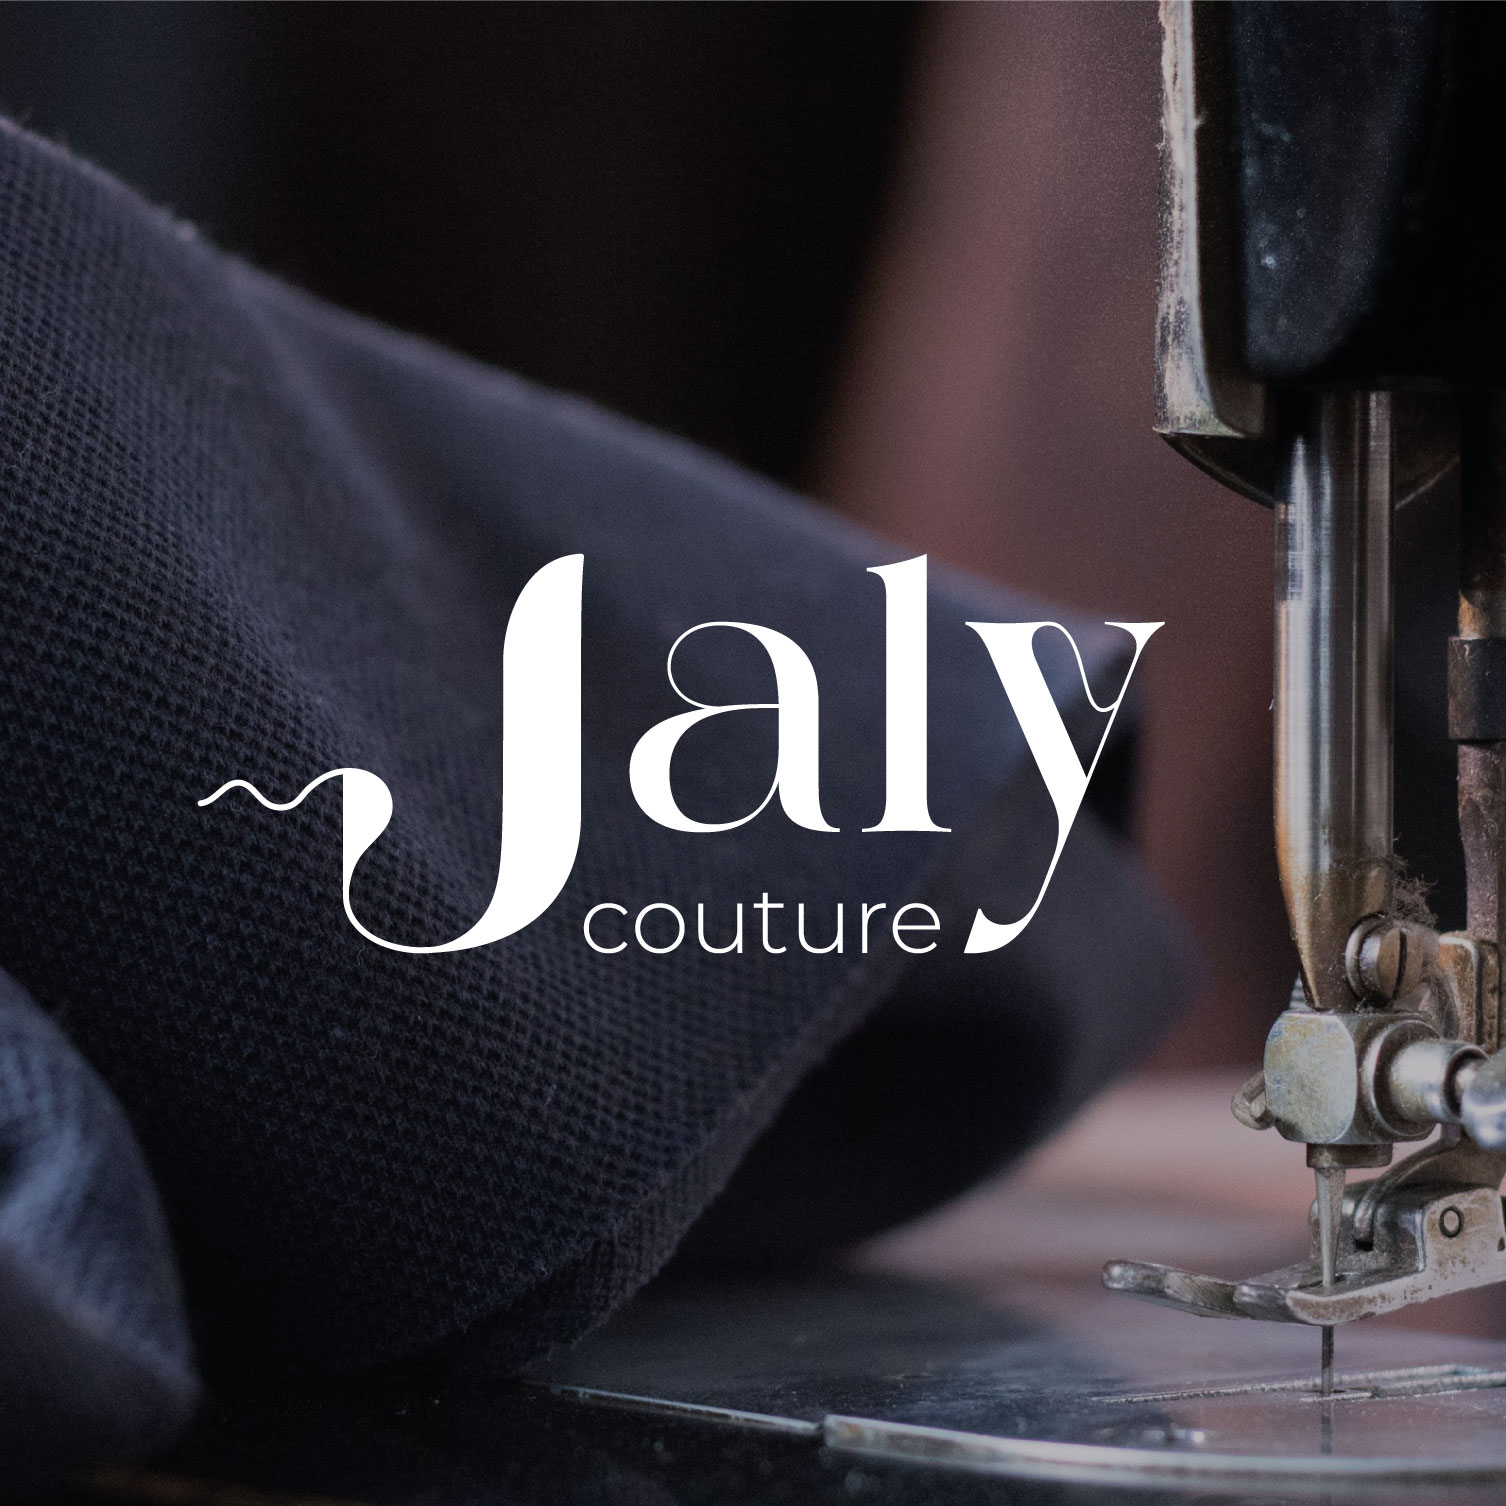 jaly-couture-logo-atelier-melicope